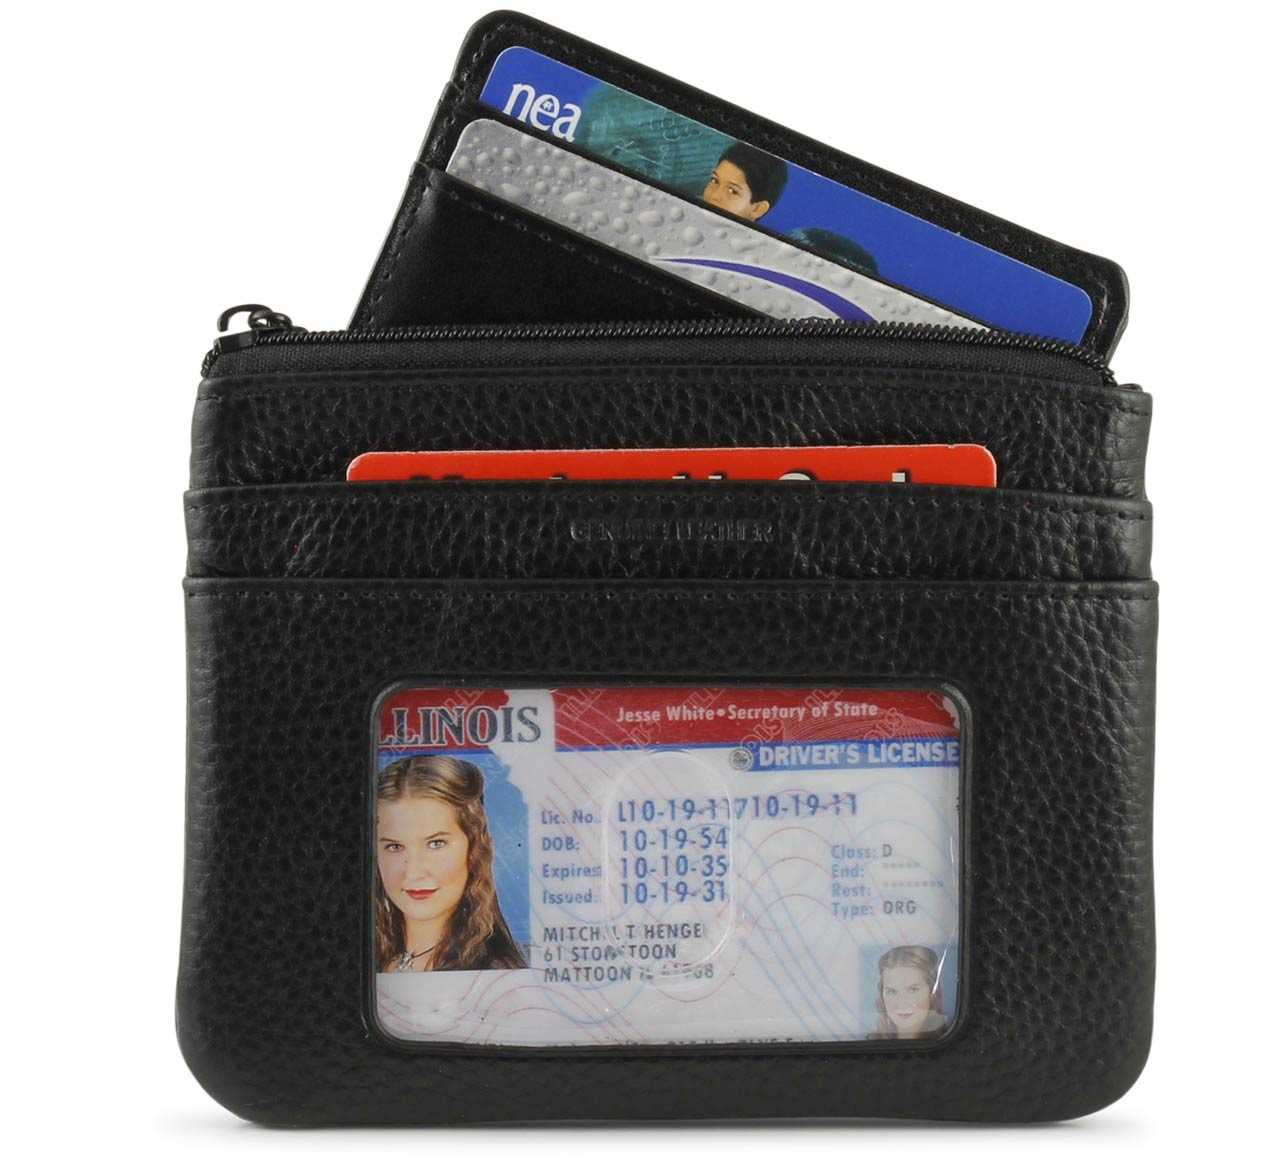 Chain Wallets for Men Rfid Blocking Bifold Double Zipper Wallet Credit card  With Coin Pocket 